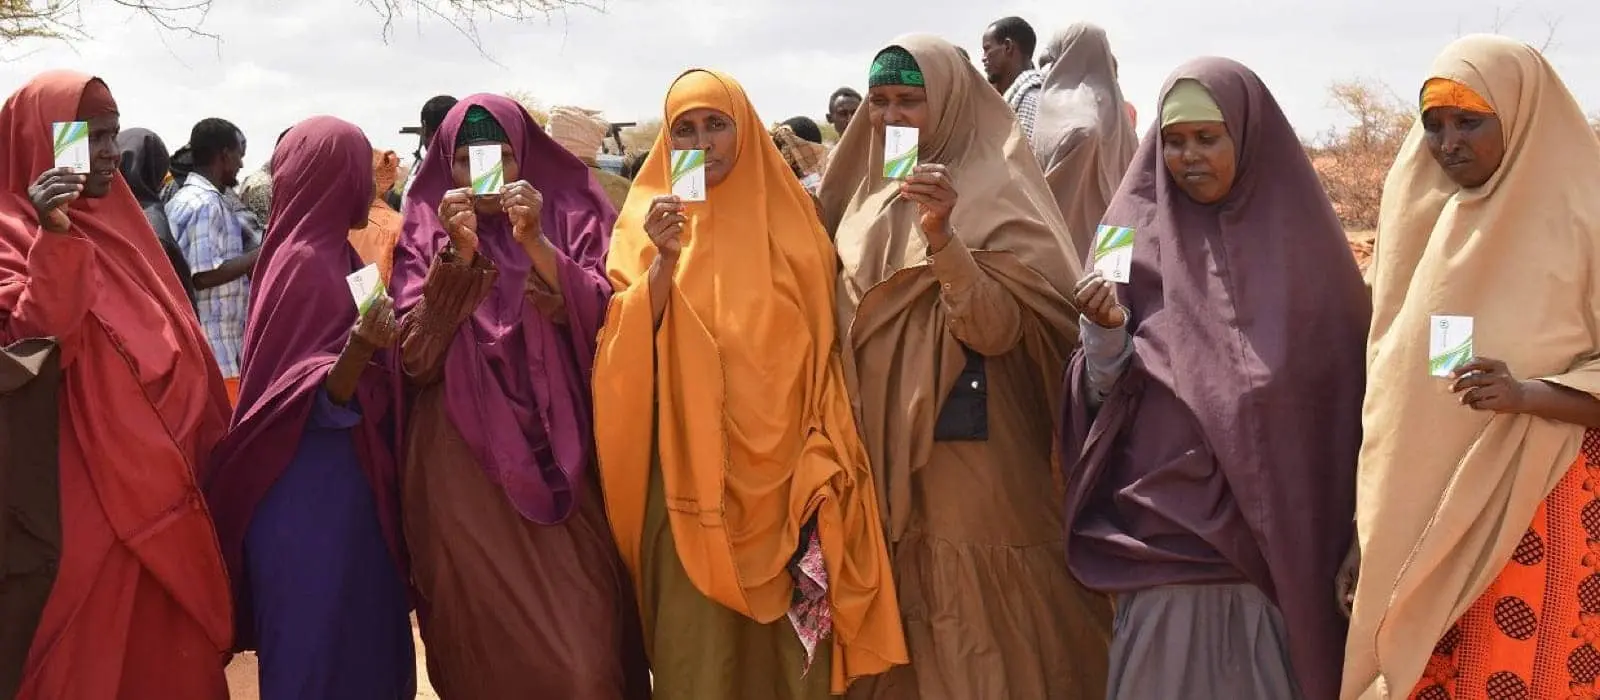 Somali women holing up SIM cards used for cash transfers.